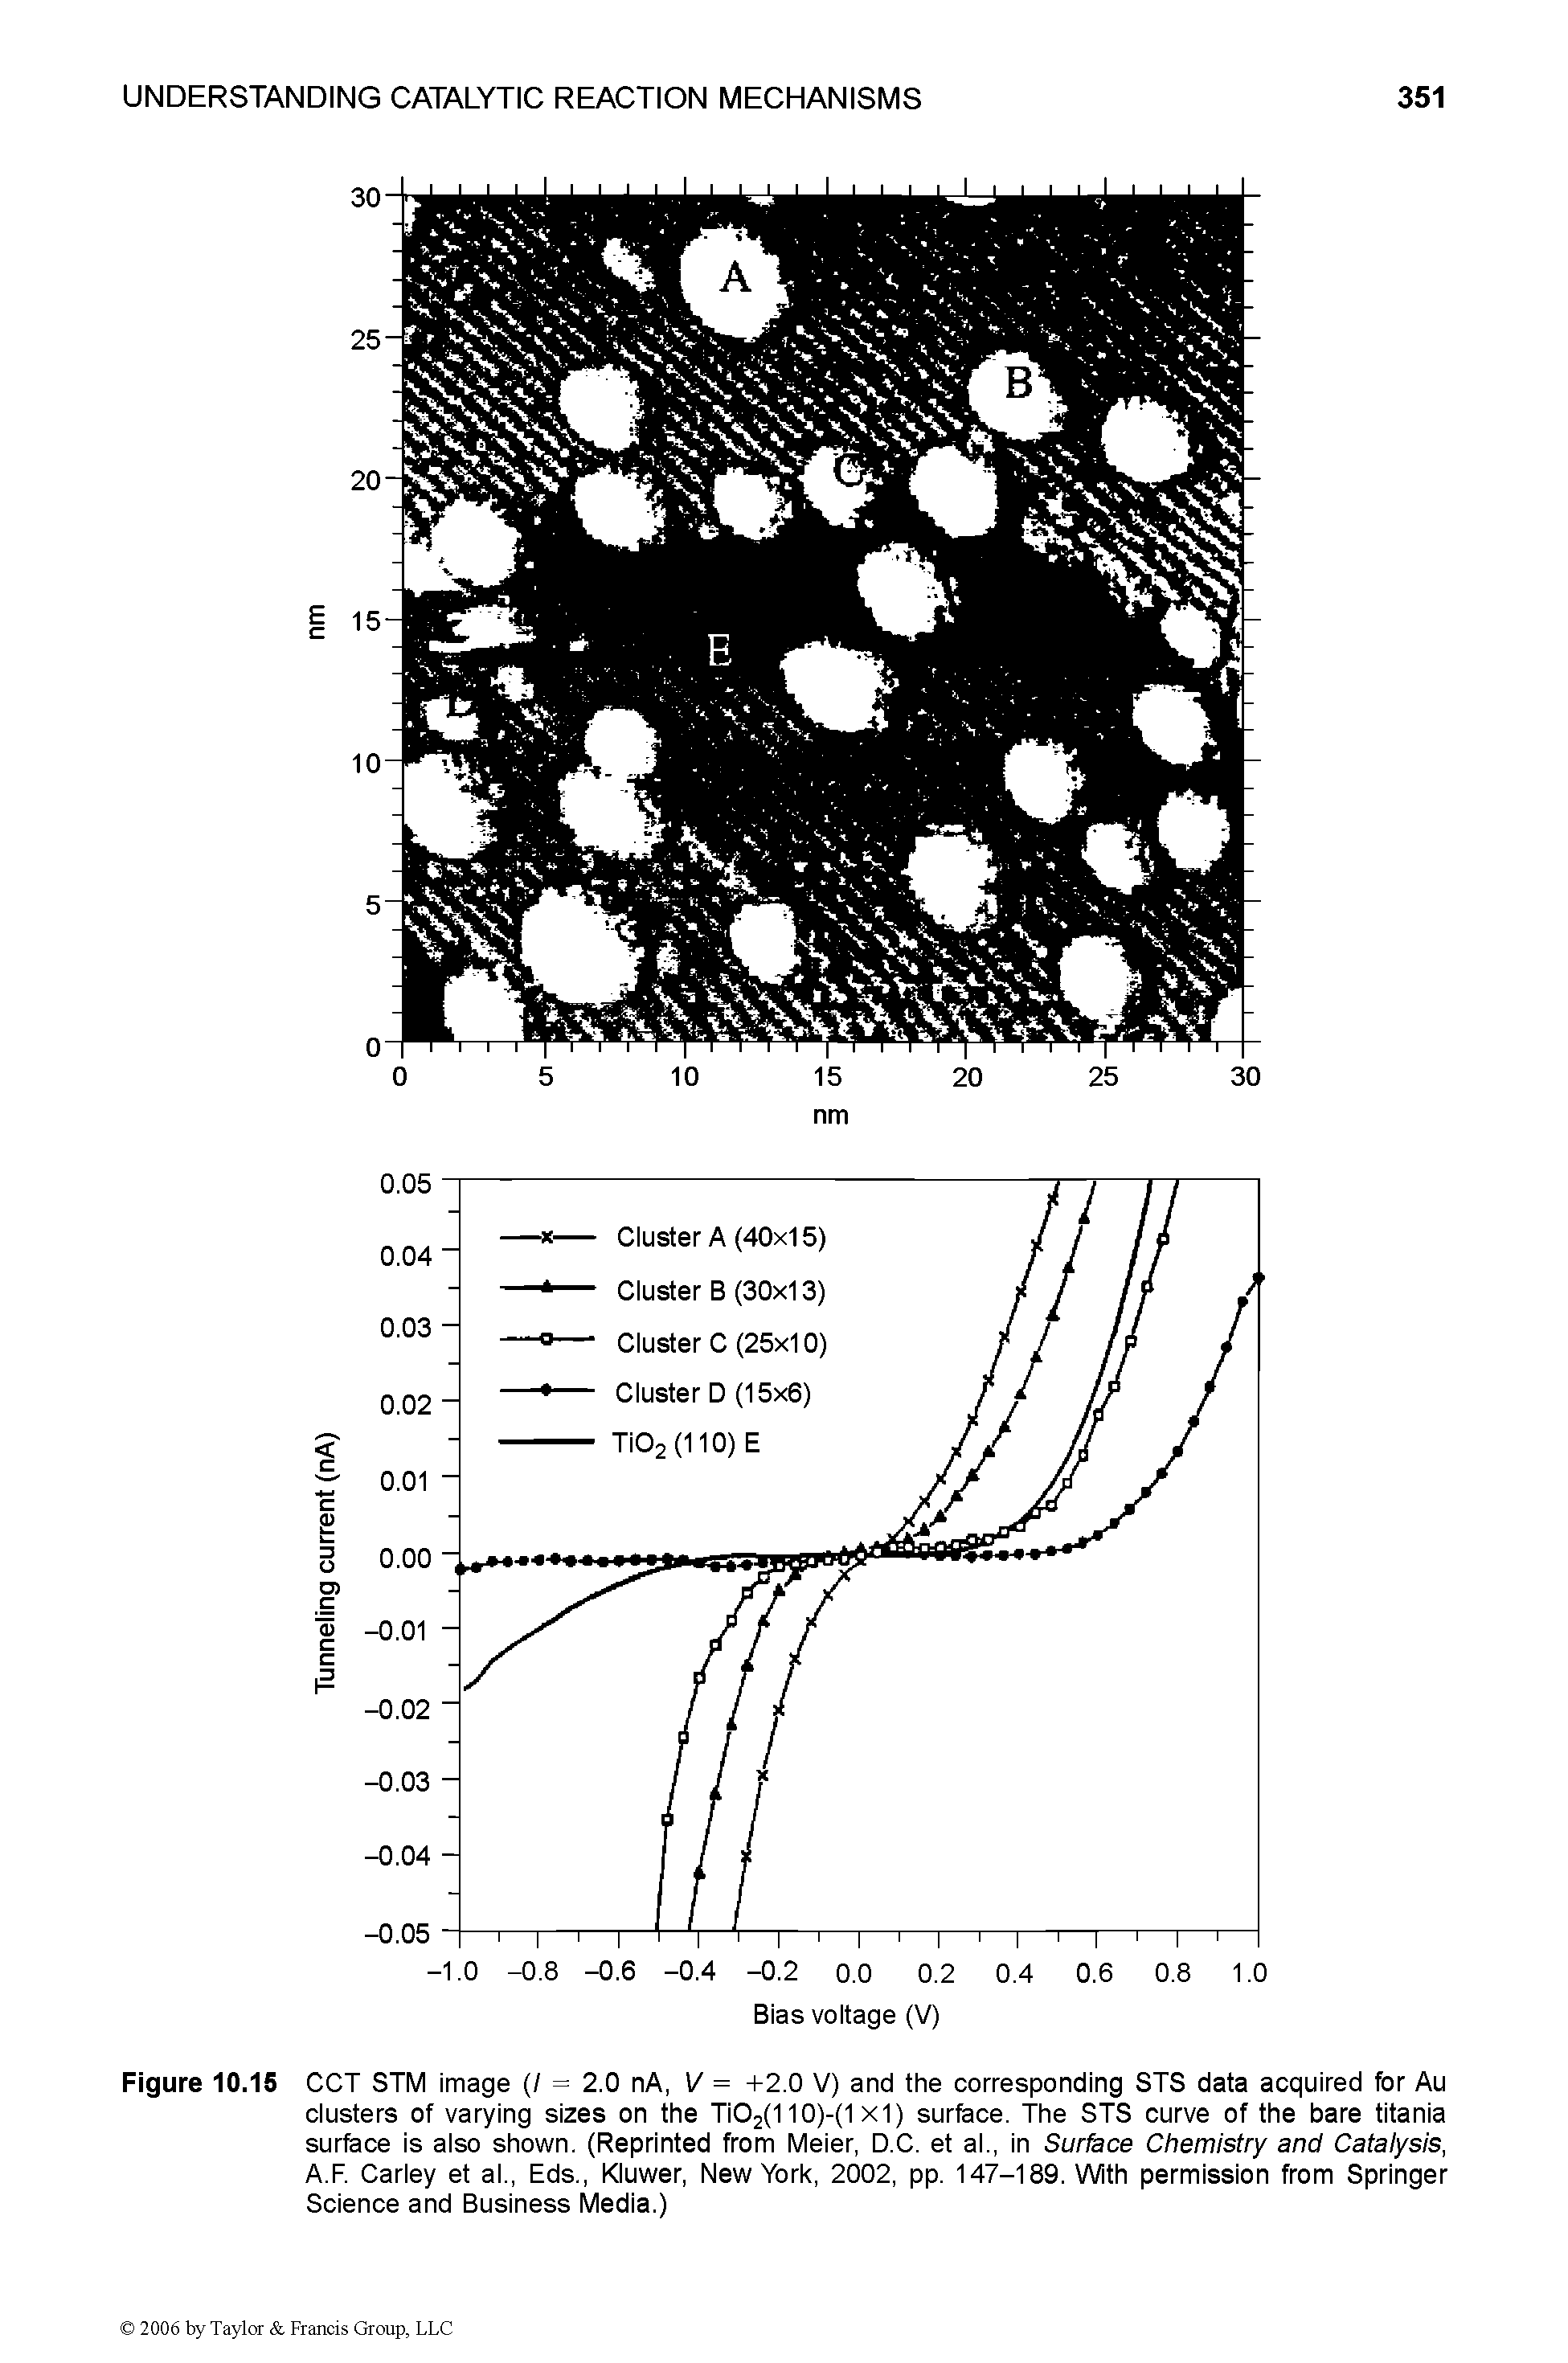 Figure 10.15 CCT STM image (/ = 2.0 nA, V = +2.0 V) and the corresponding STS data acquired for Au clusters of varying sizes on the Ti02(110)-(1 x 1) surface. The STS curve of the bare titania surface is also shown. (Reprinted from Meier, D.C. et al., in Surface Chemistry and Catalysis, A.F. Carley et al., Eds., Kluwer, New York, 2002, pp. 147-189. With permission from Springer Science and Business Media.)...